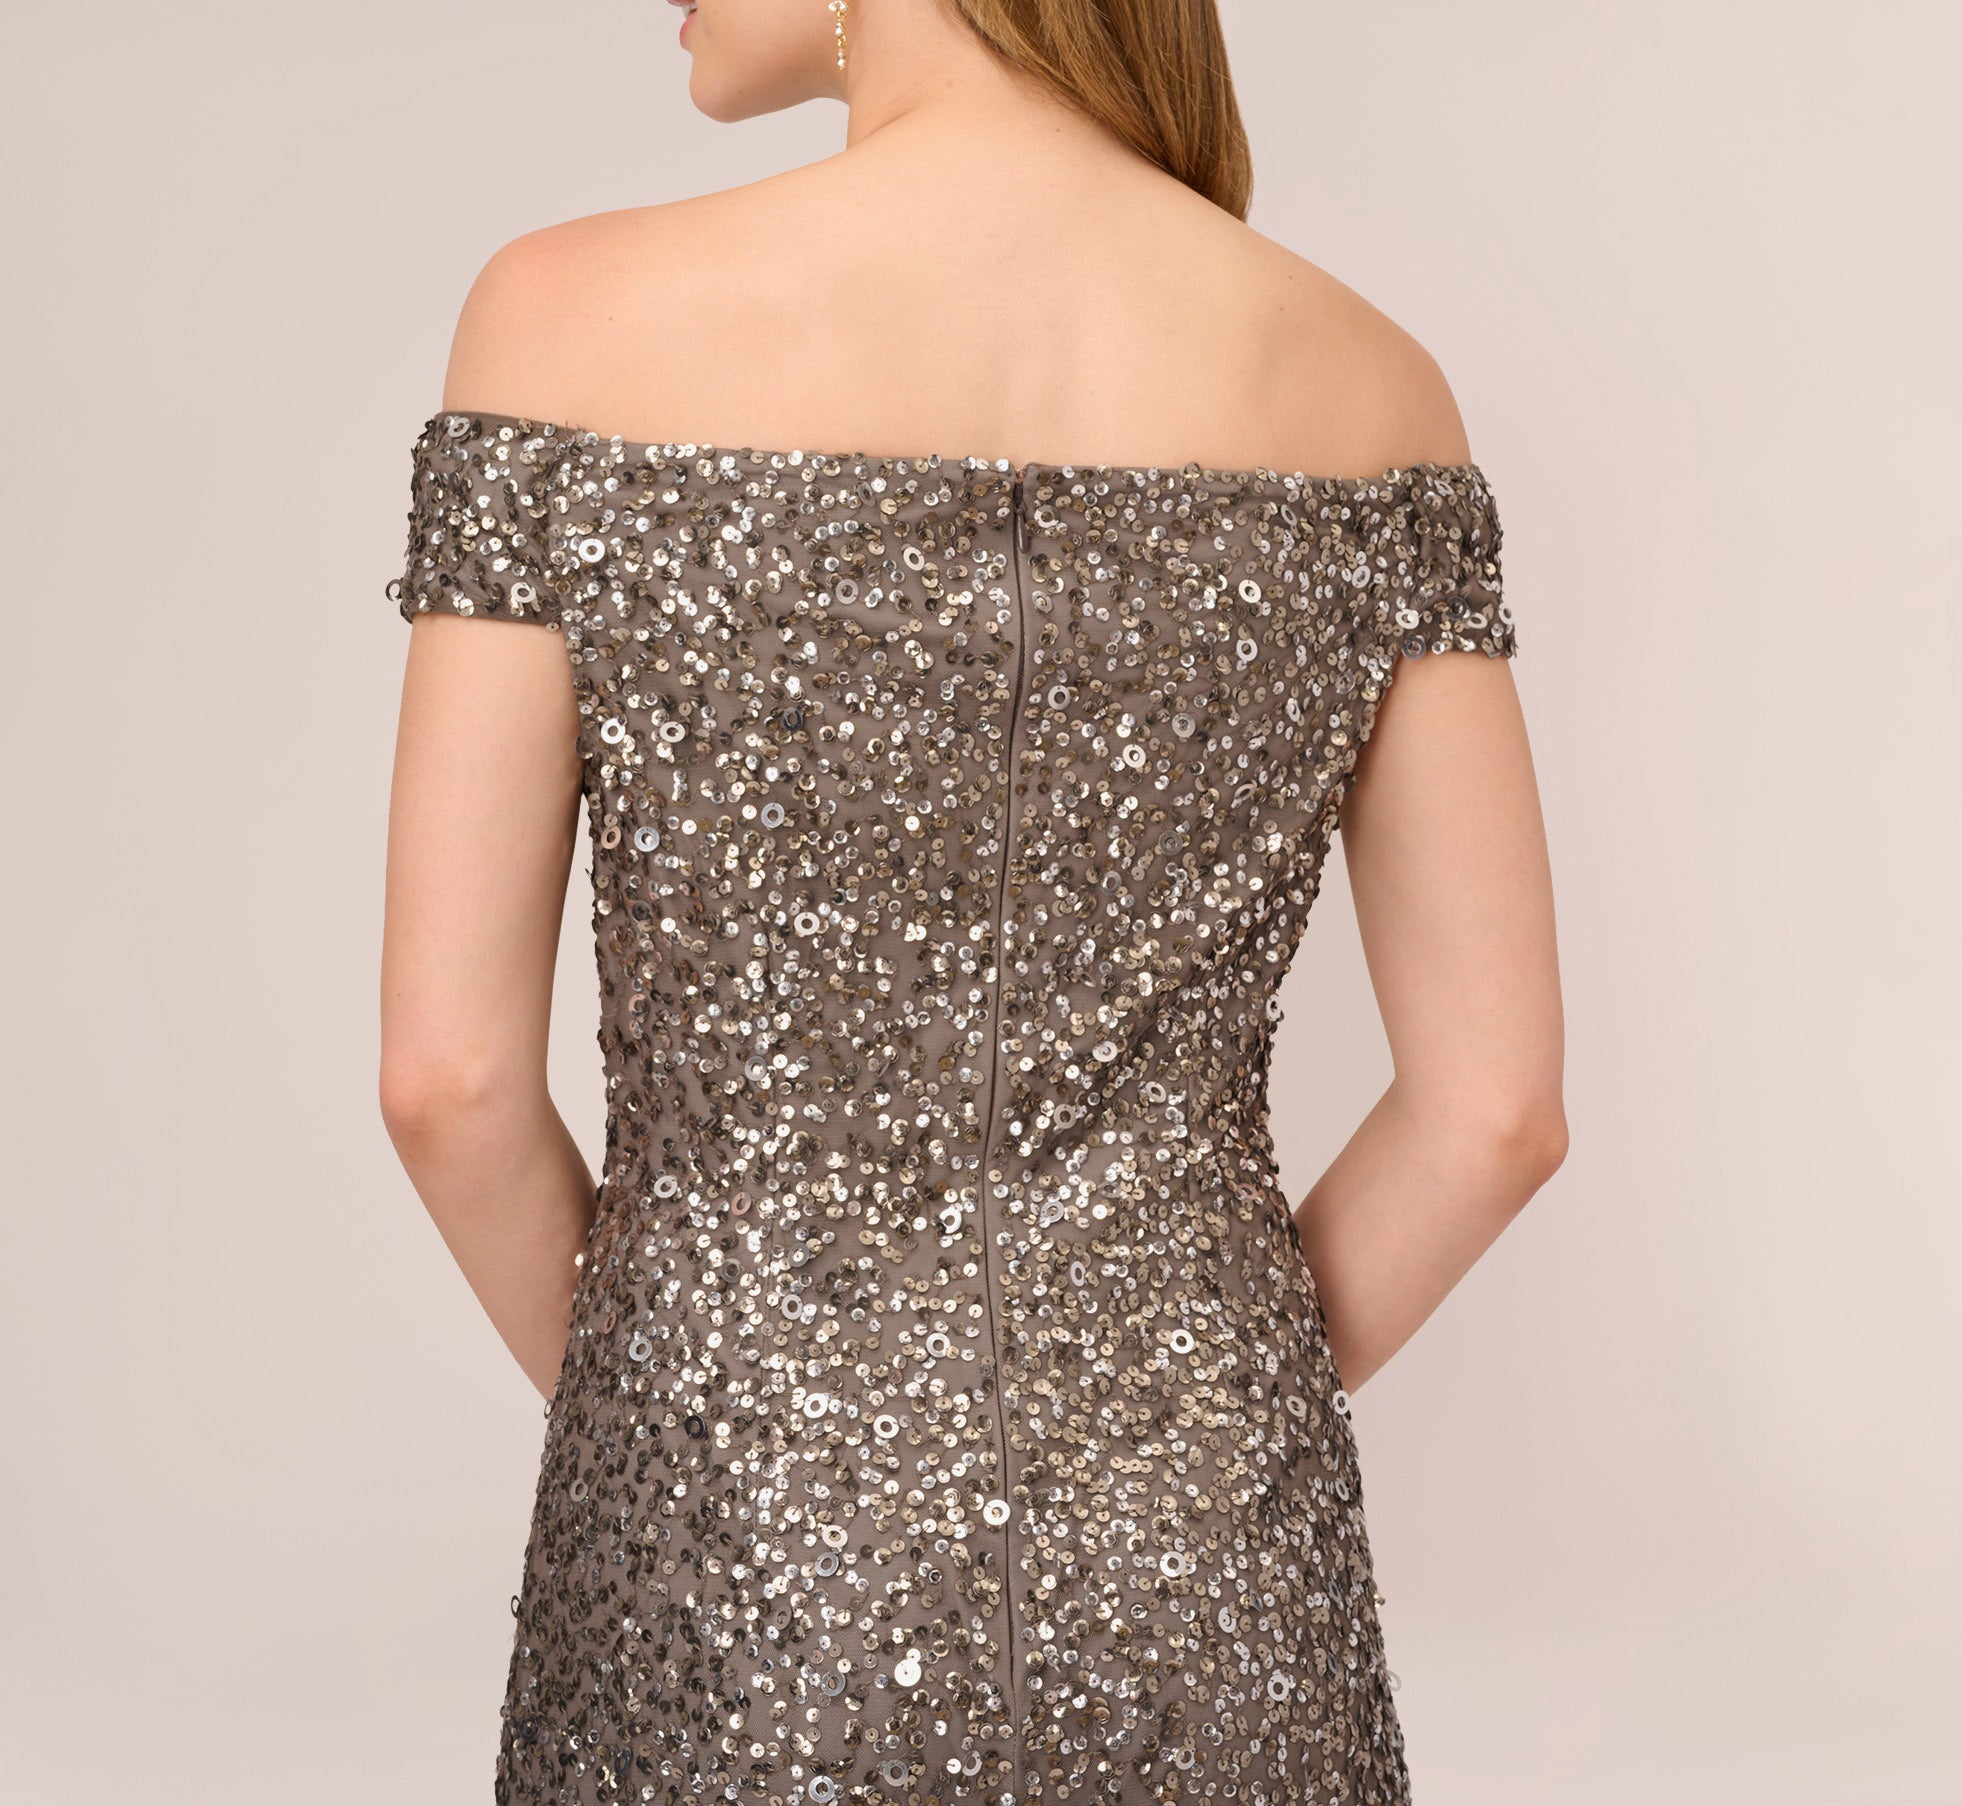 Off The Shoulder Sequin Beaded Gown In Lead | Adrianna Papell